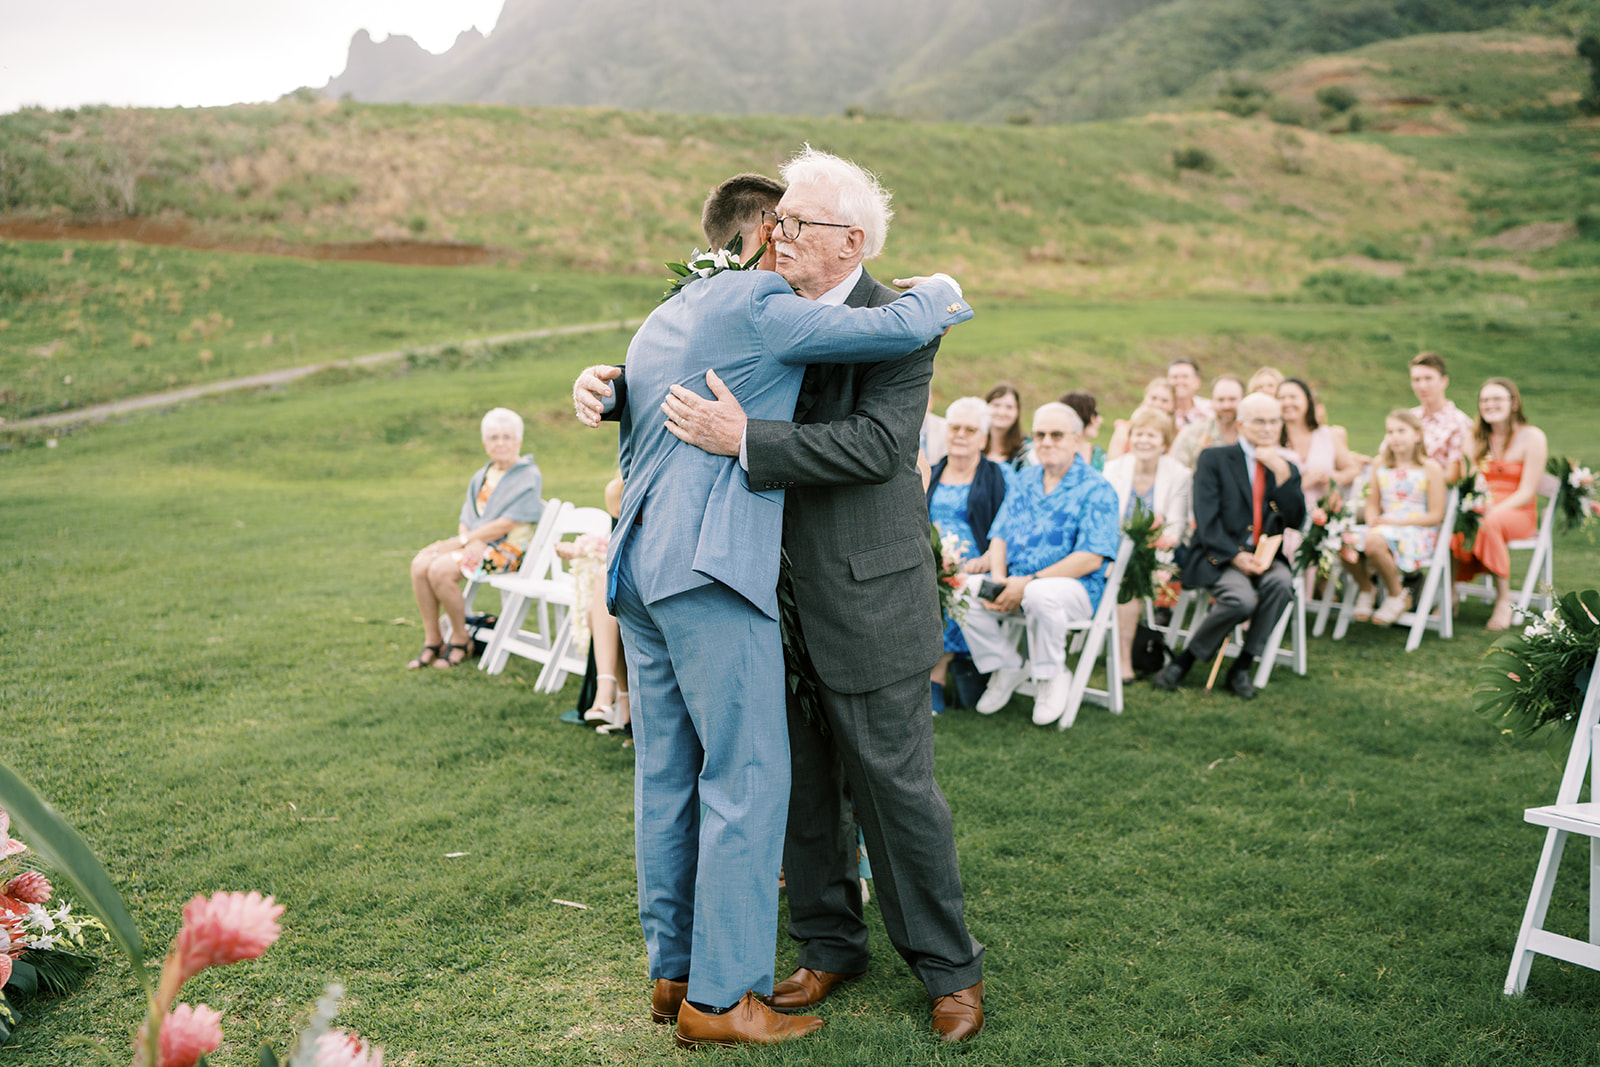 A man hugging his father during a wedding ceremony.